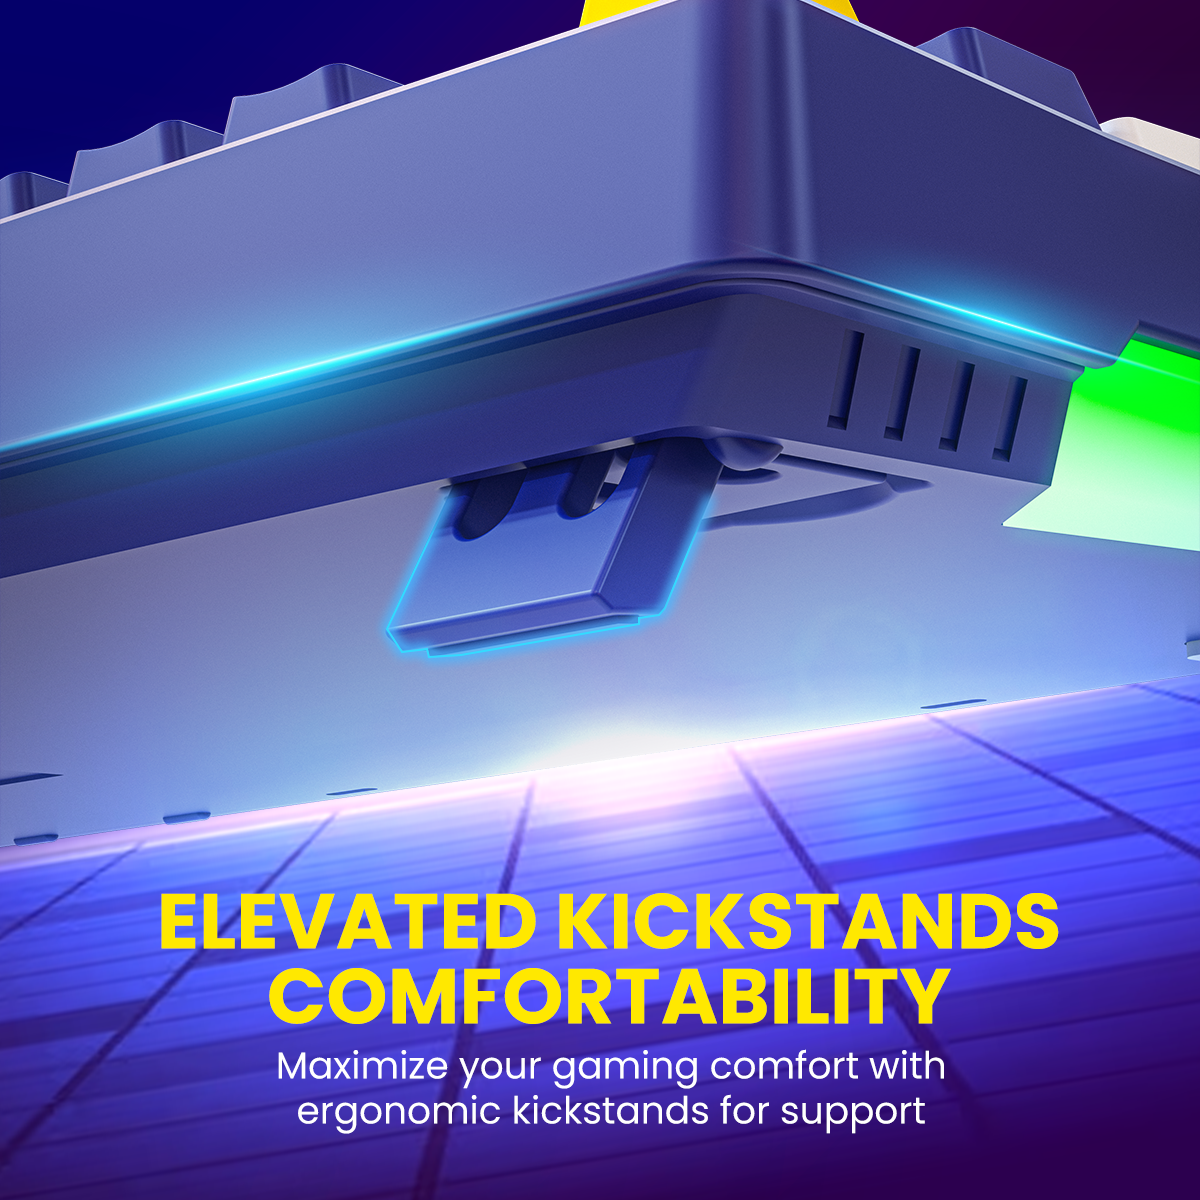 Portronics K2- Blue Gaming wired mechanical Keyboard comes with elevated kickstands for maximum comfort